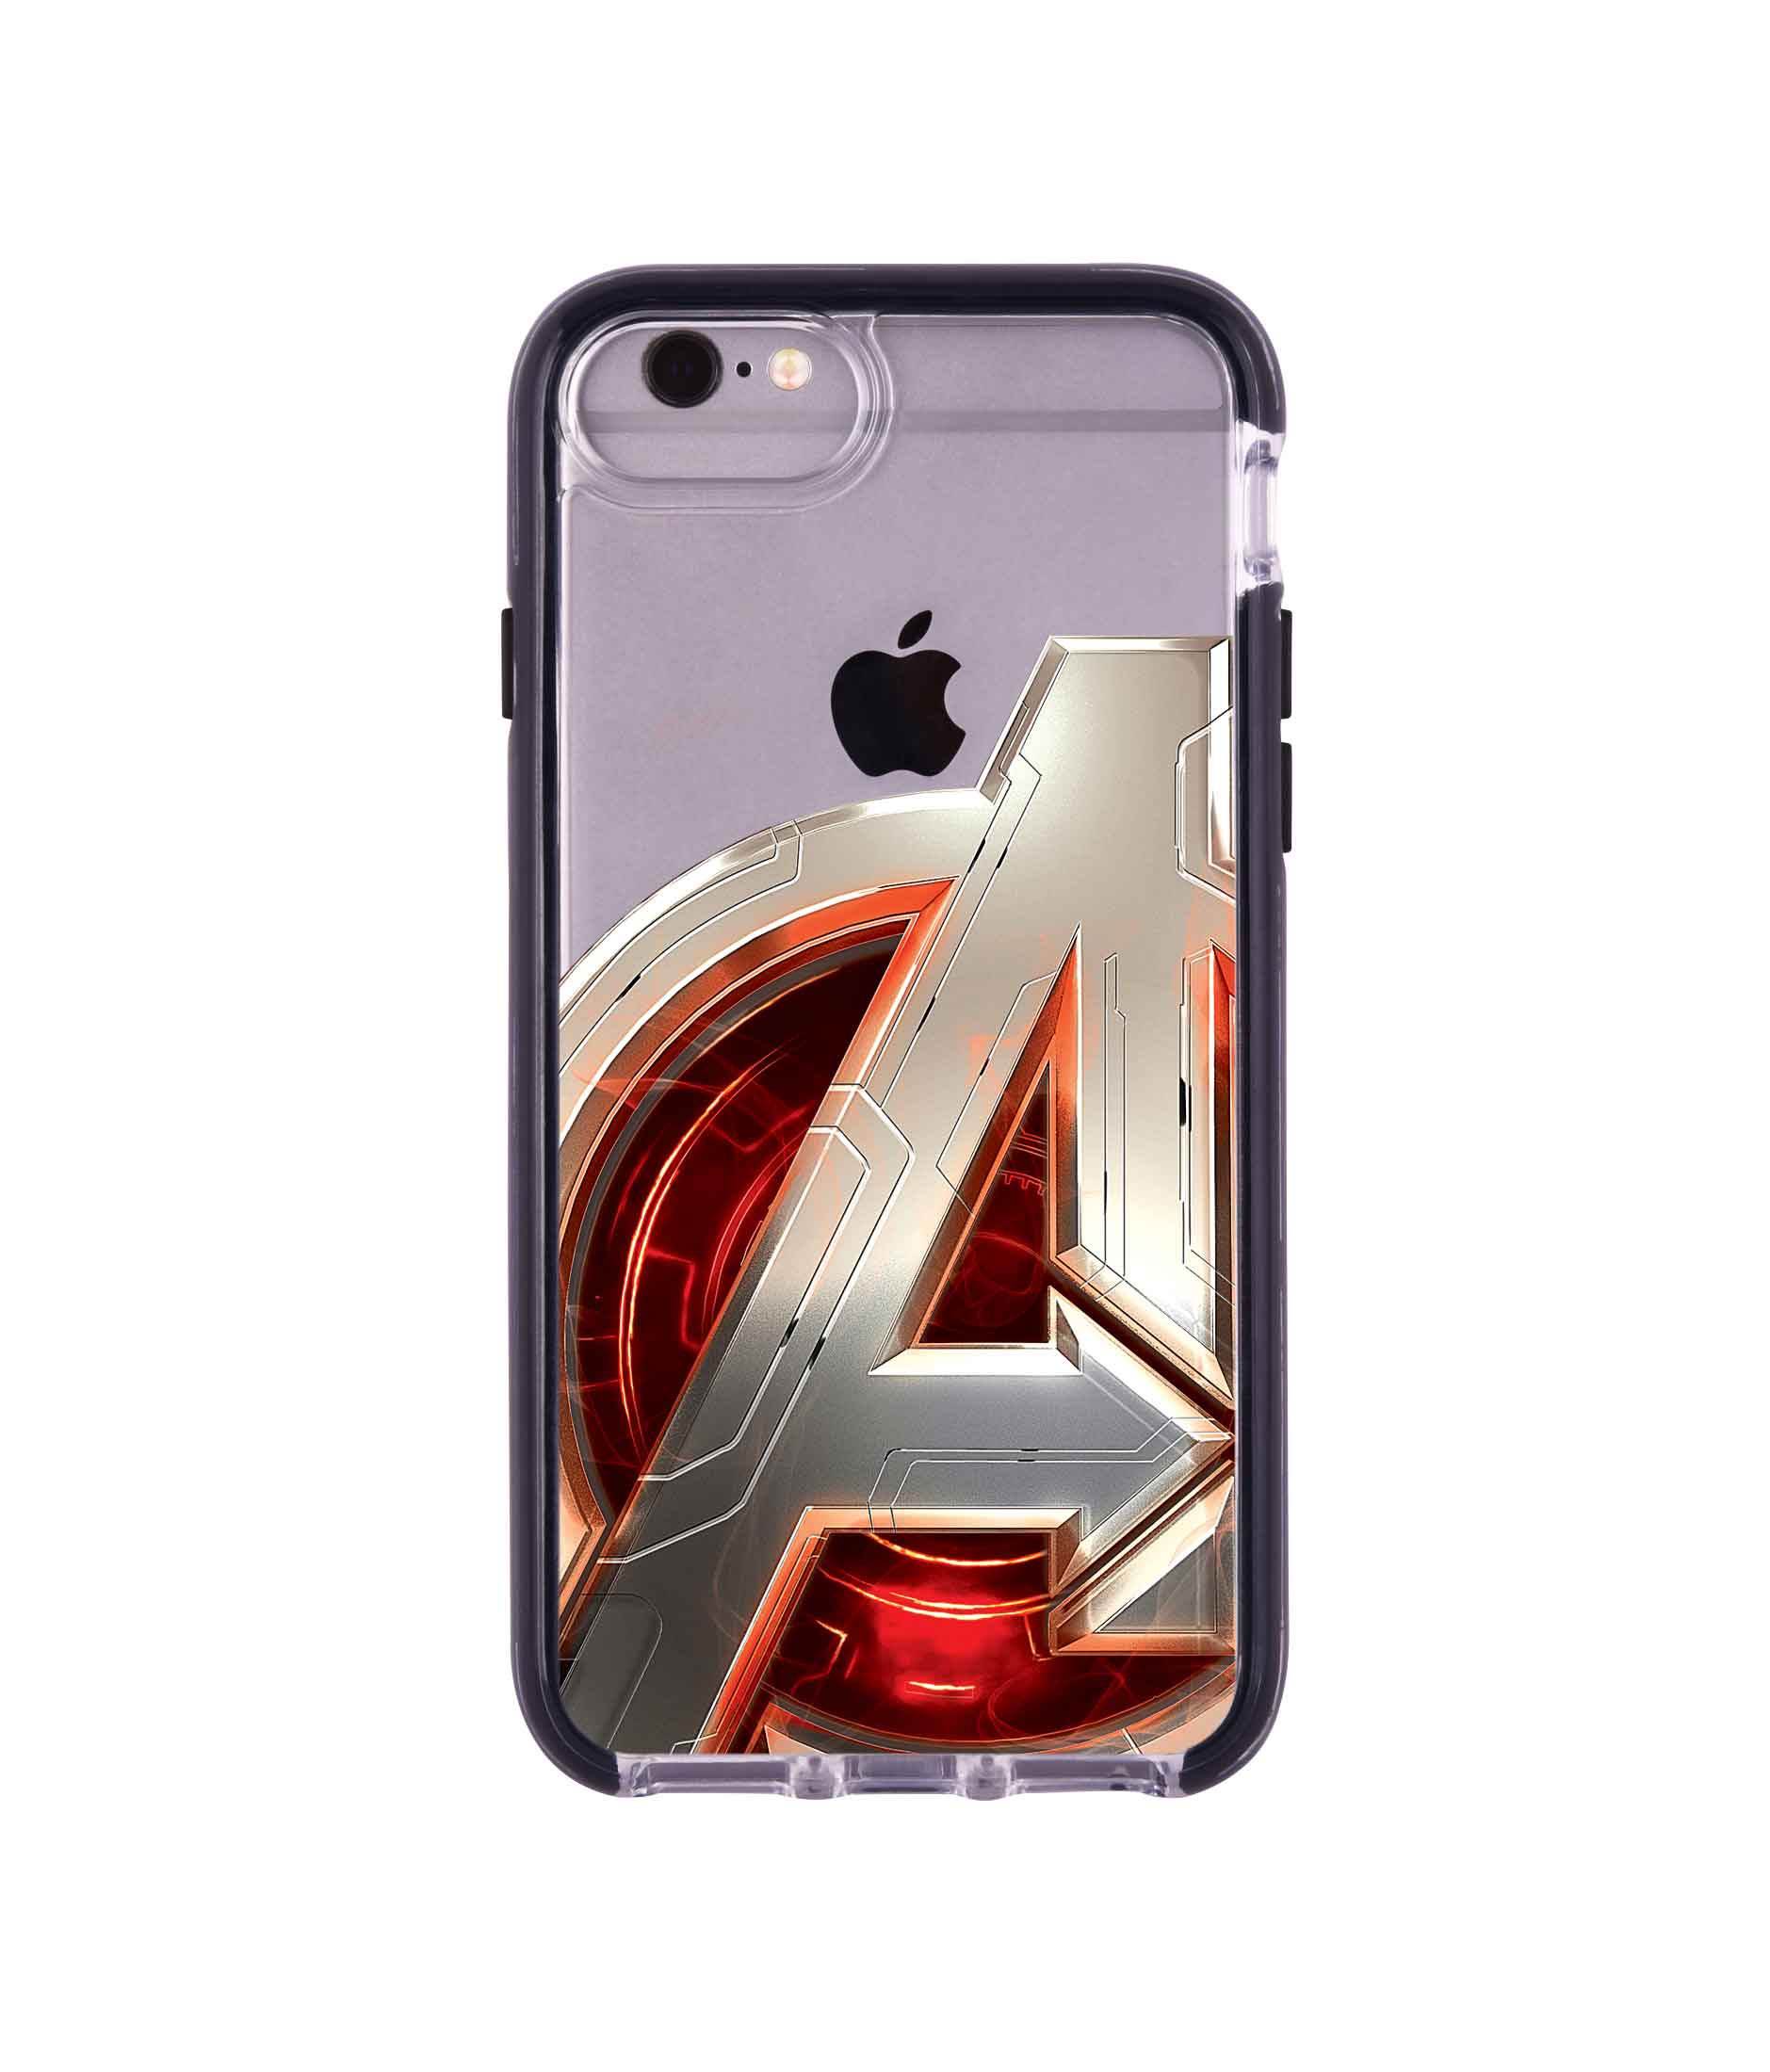 Avengers Version 2 - Extreme Phone Case for iPhone 6